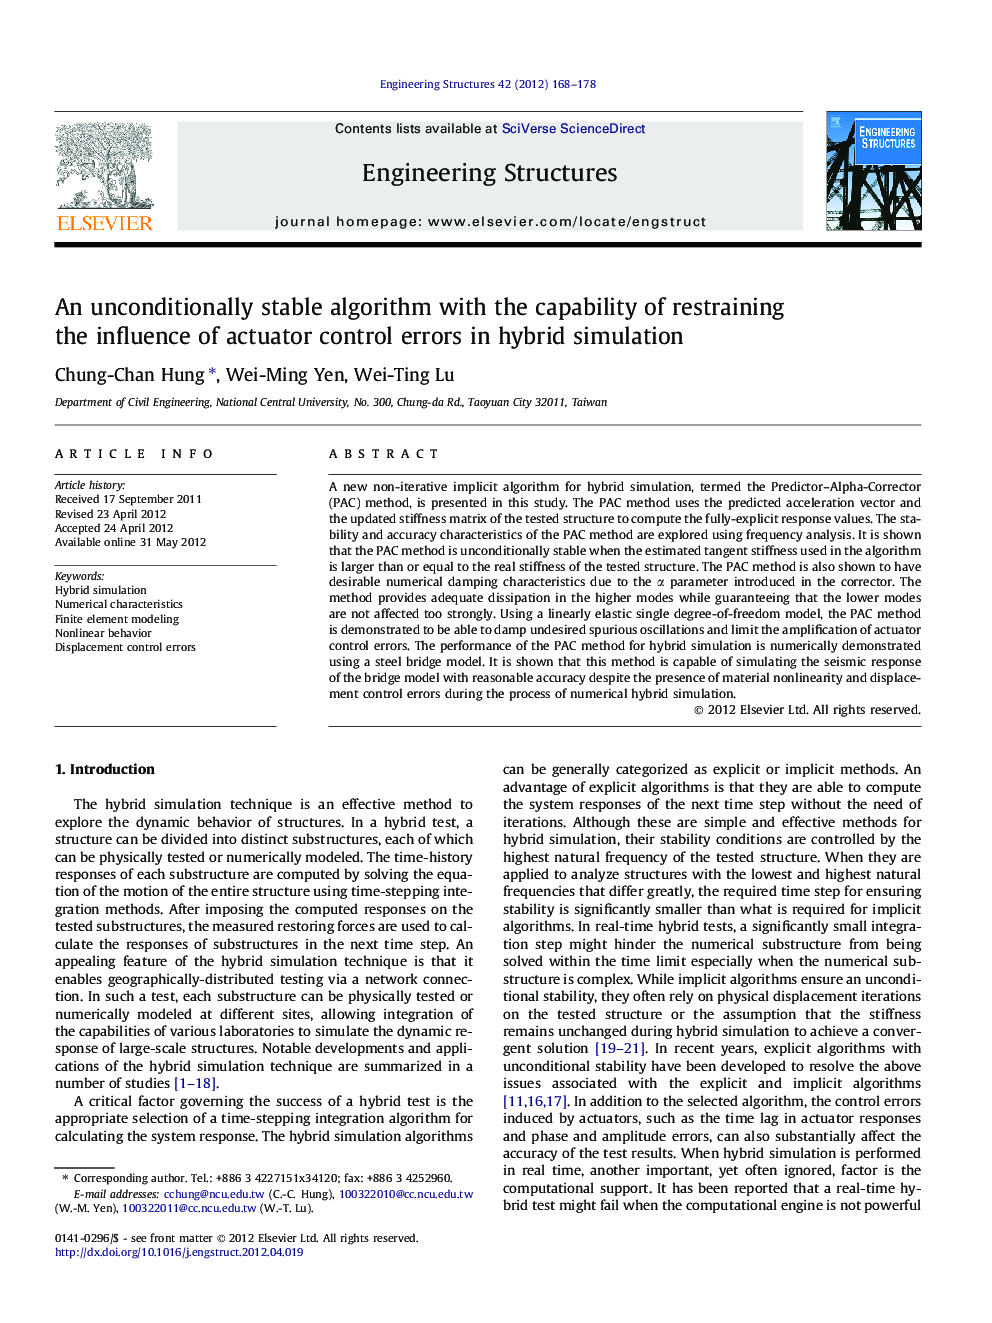 An unconditionally stable algorithm with the capability of restraining the influence of actuator control errors in hybrid simulation